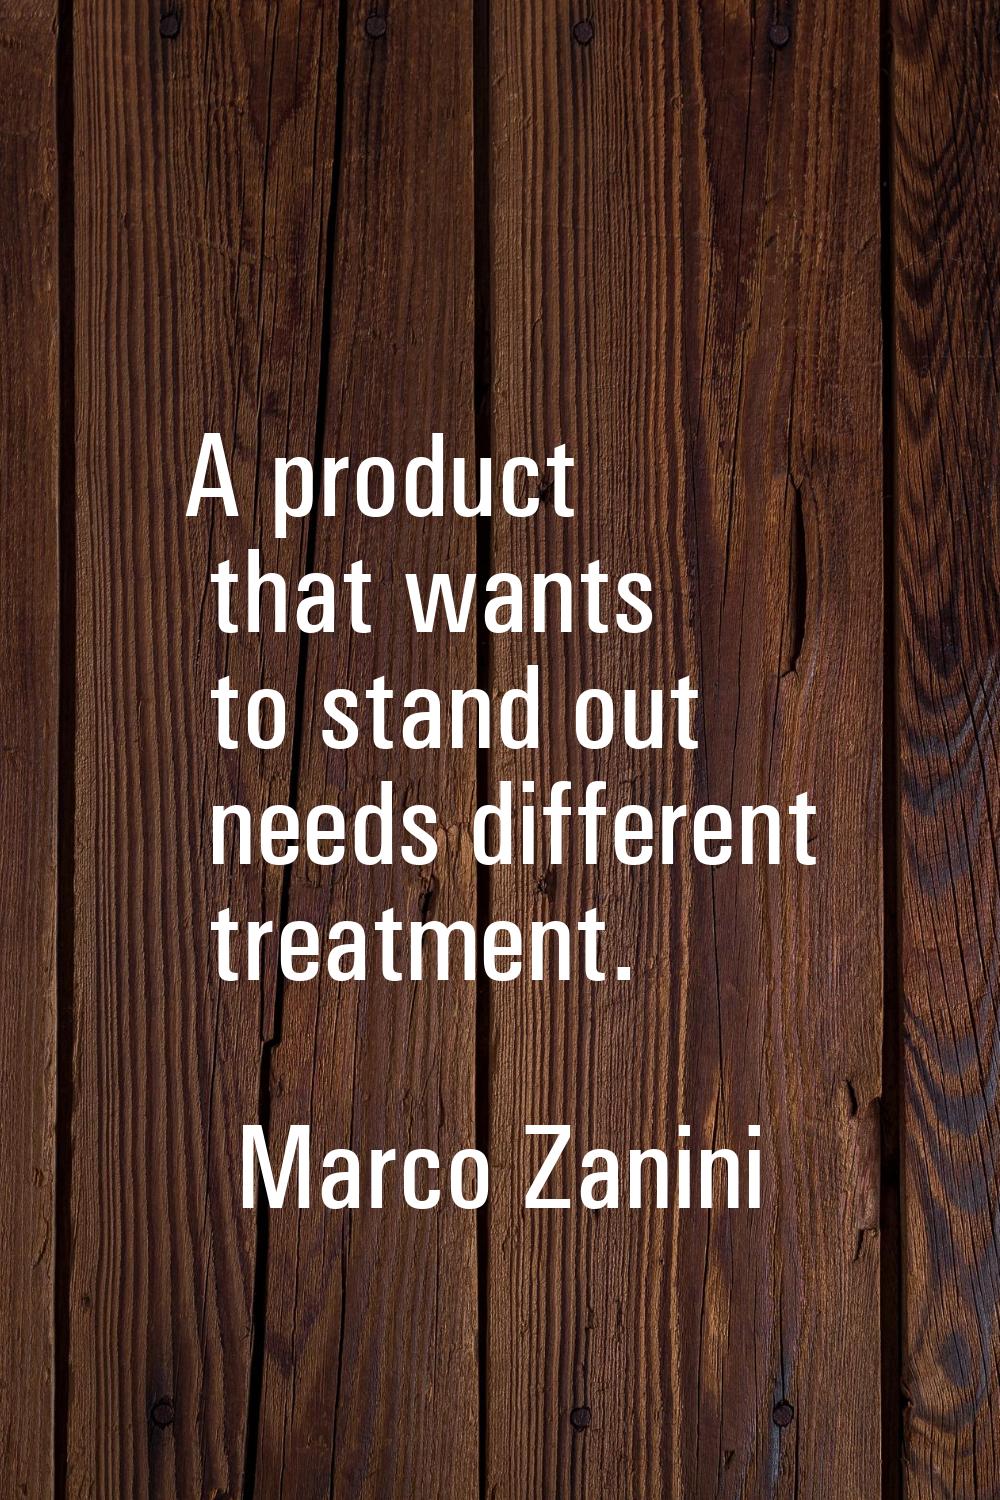 A product that wants to stand out needs different treatment.